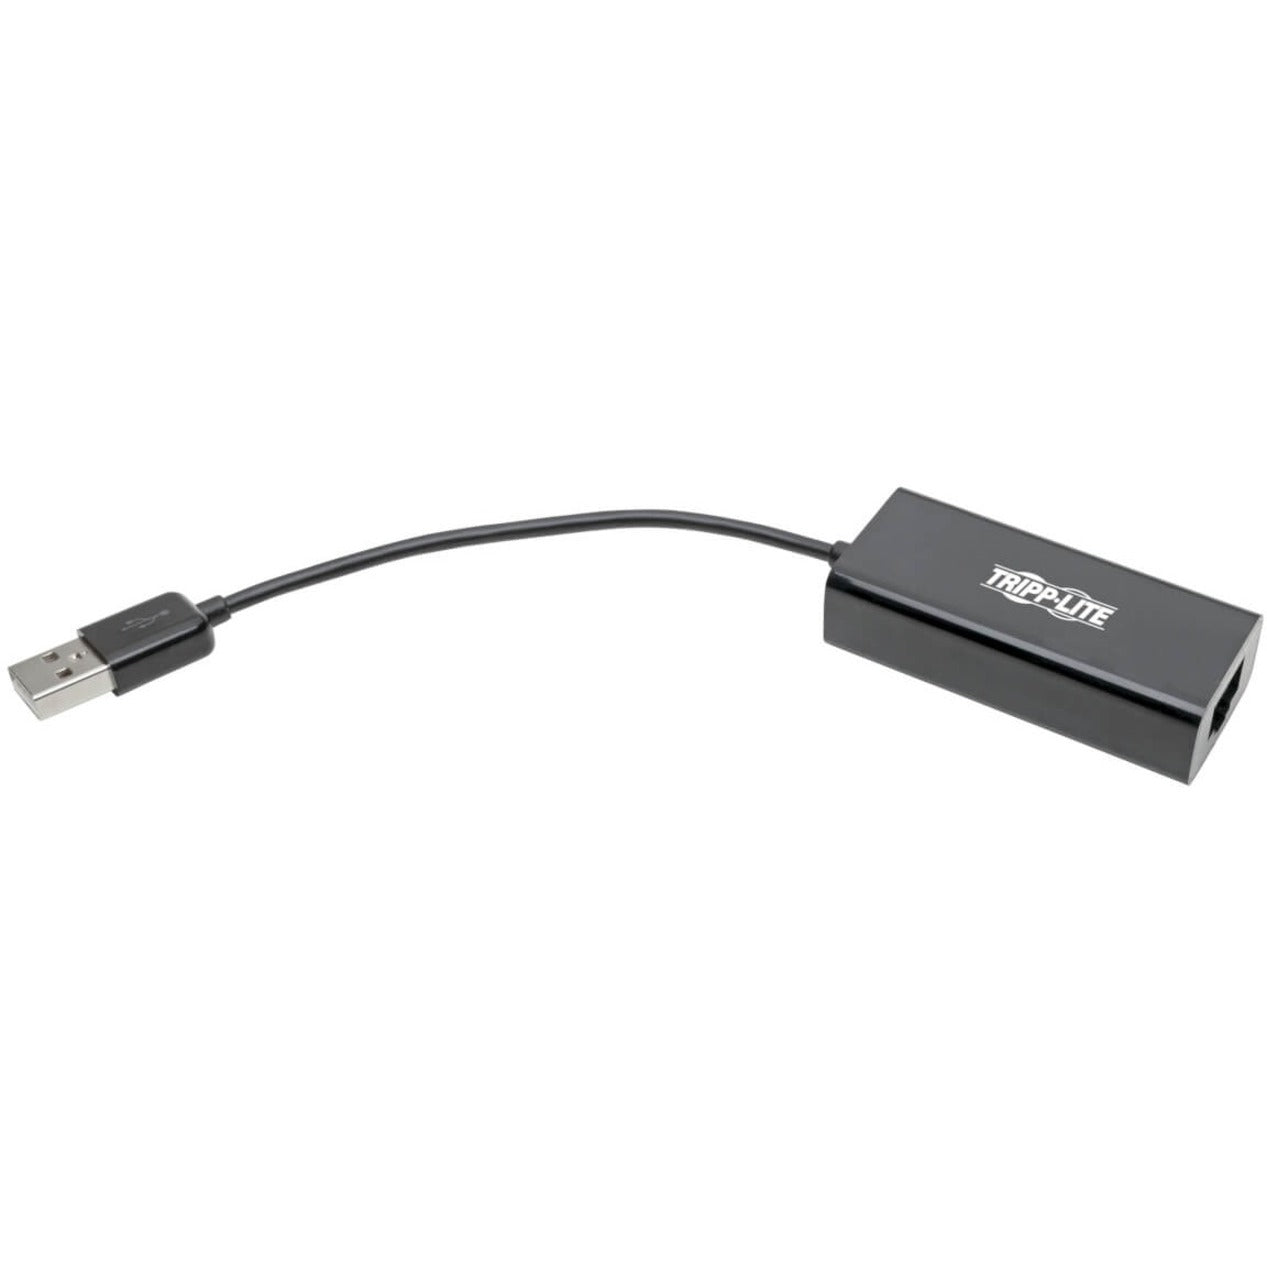 Tripp Lite U236-000-R USB 2.0 to Ethernet Adapter, 10/100 Mbps, Easy Network Connection